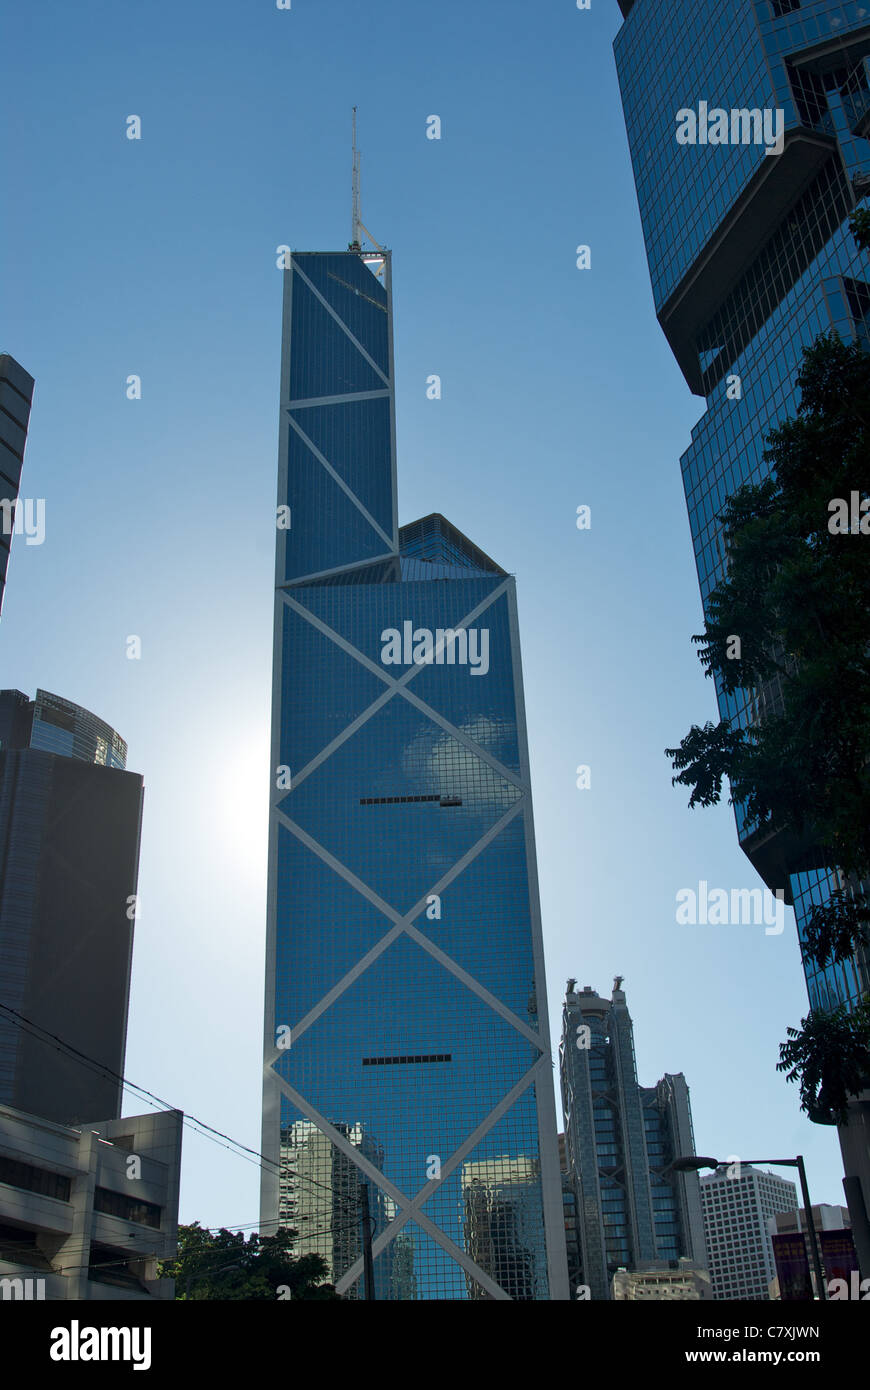 The Bank of China tower, designed by architect I.M. Pei. Stock Photo